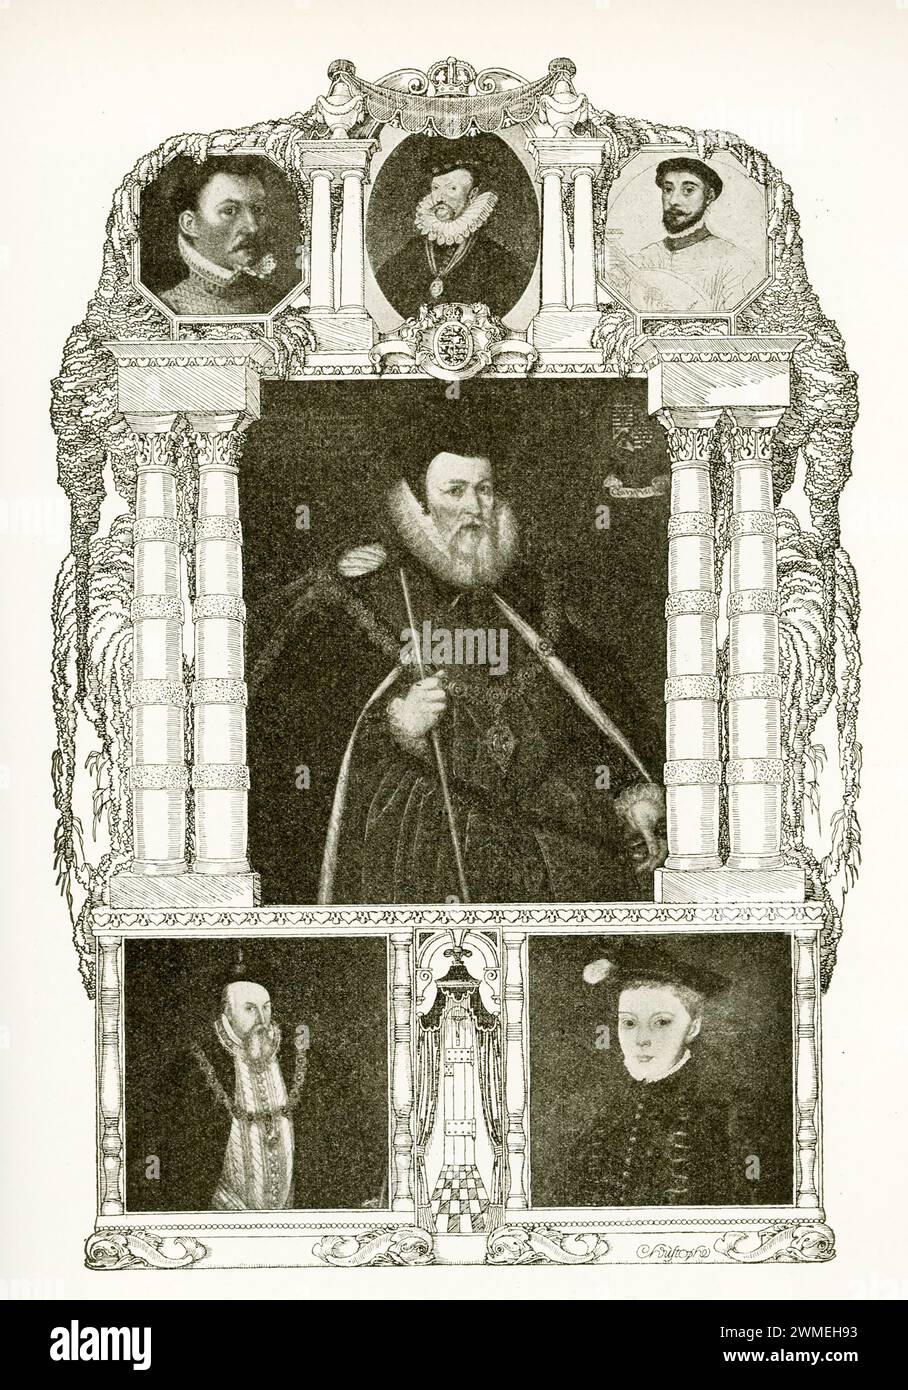 Titled “Effigies of the Mary Stuart Tragedy,” this image shows from top to bottom, left to right: Earl of Bothwell (third husband of Mary Stuart), Sir Umnas Paulet (dungeon master of Mary Stuart), David Riccio (secretary of Mary Stuart), William Cecil/Lord Burleigh (chancellor of Queen Elizabeth), Robert Dudley (Earl of Leicester), Lord Henry Dudley (second husband of Mary Stuart). Mary, Queen of Scots, also known as Mary Stuart or Mary I of Scotland, died 1587. She was Queen of Scotland from 14 December 1542 until her forced abdication in 1567. The only surviving legitimate child of James V o Stock Photo